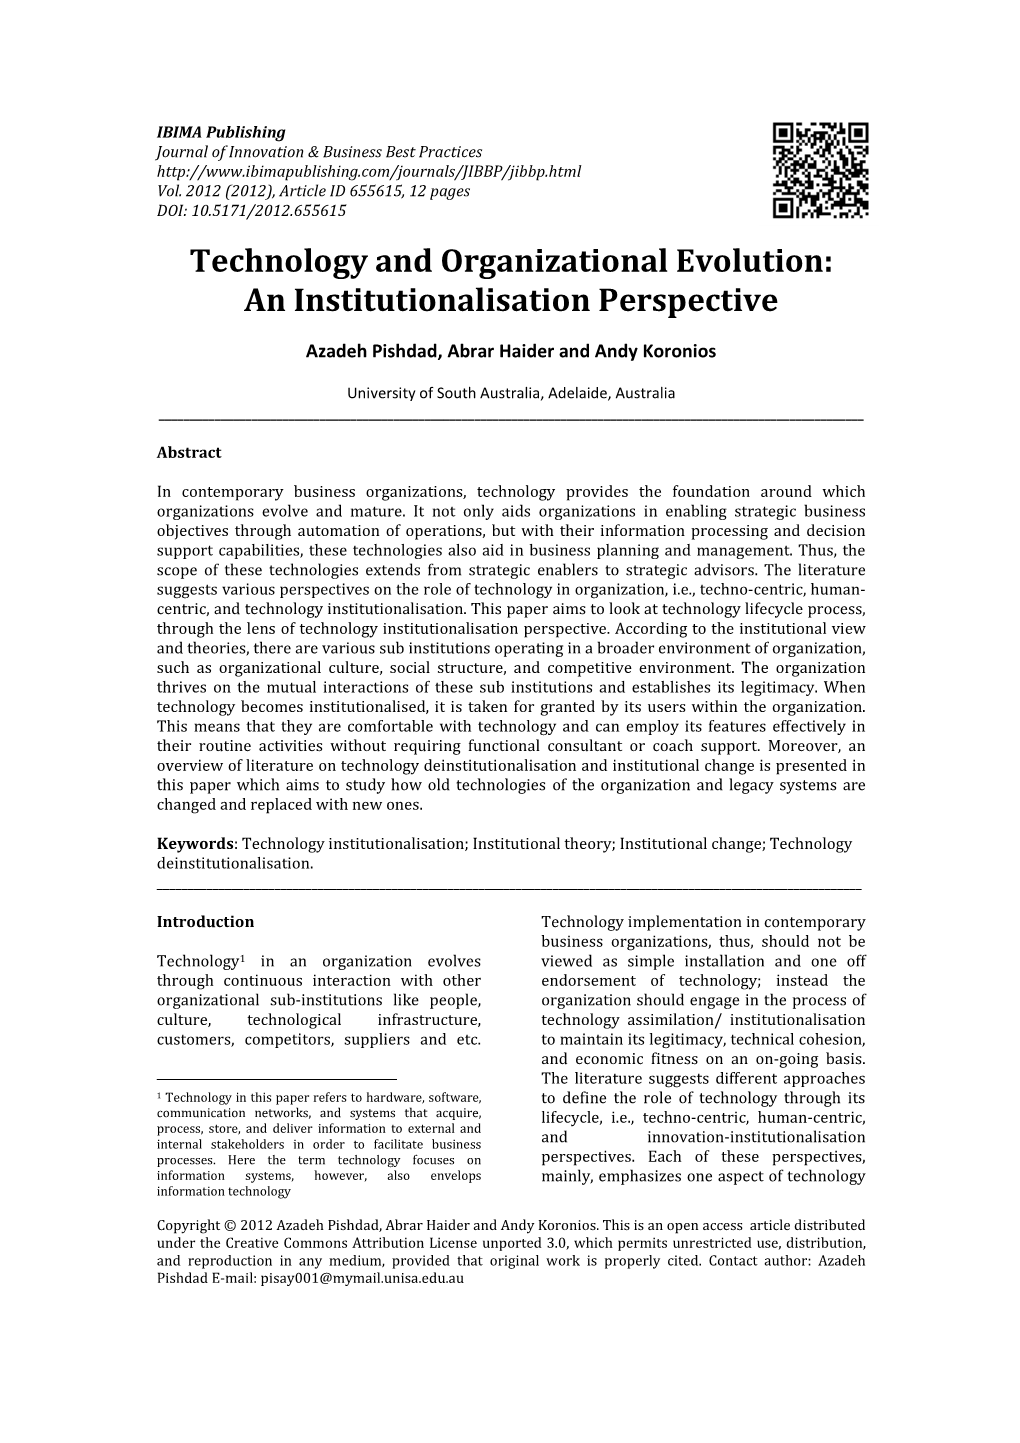 Technology and Organizational Evolution: an Institutionalisation Perspective